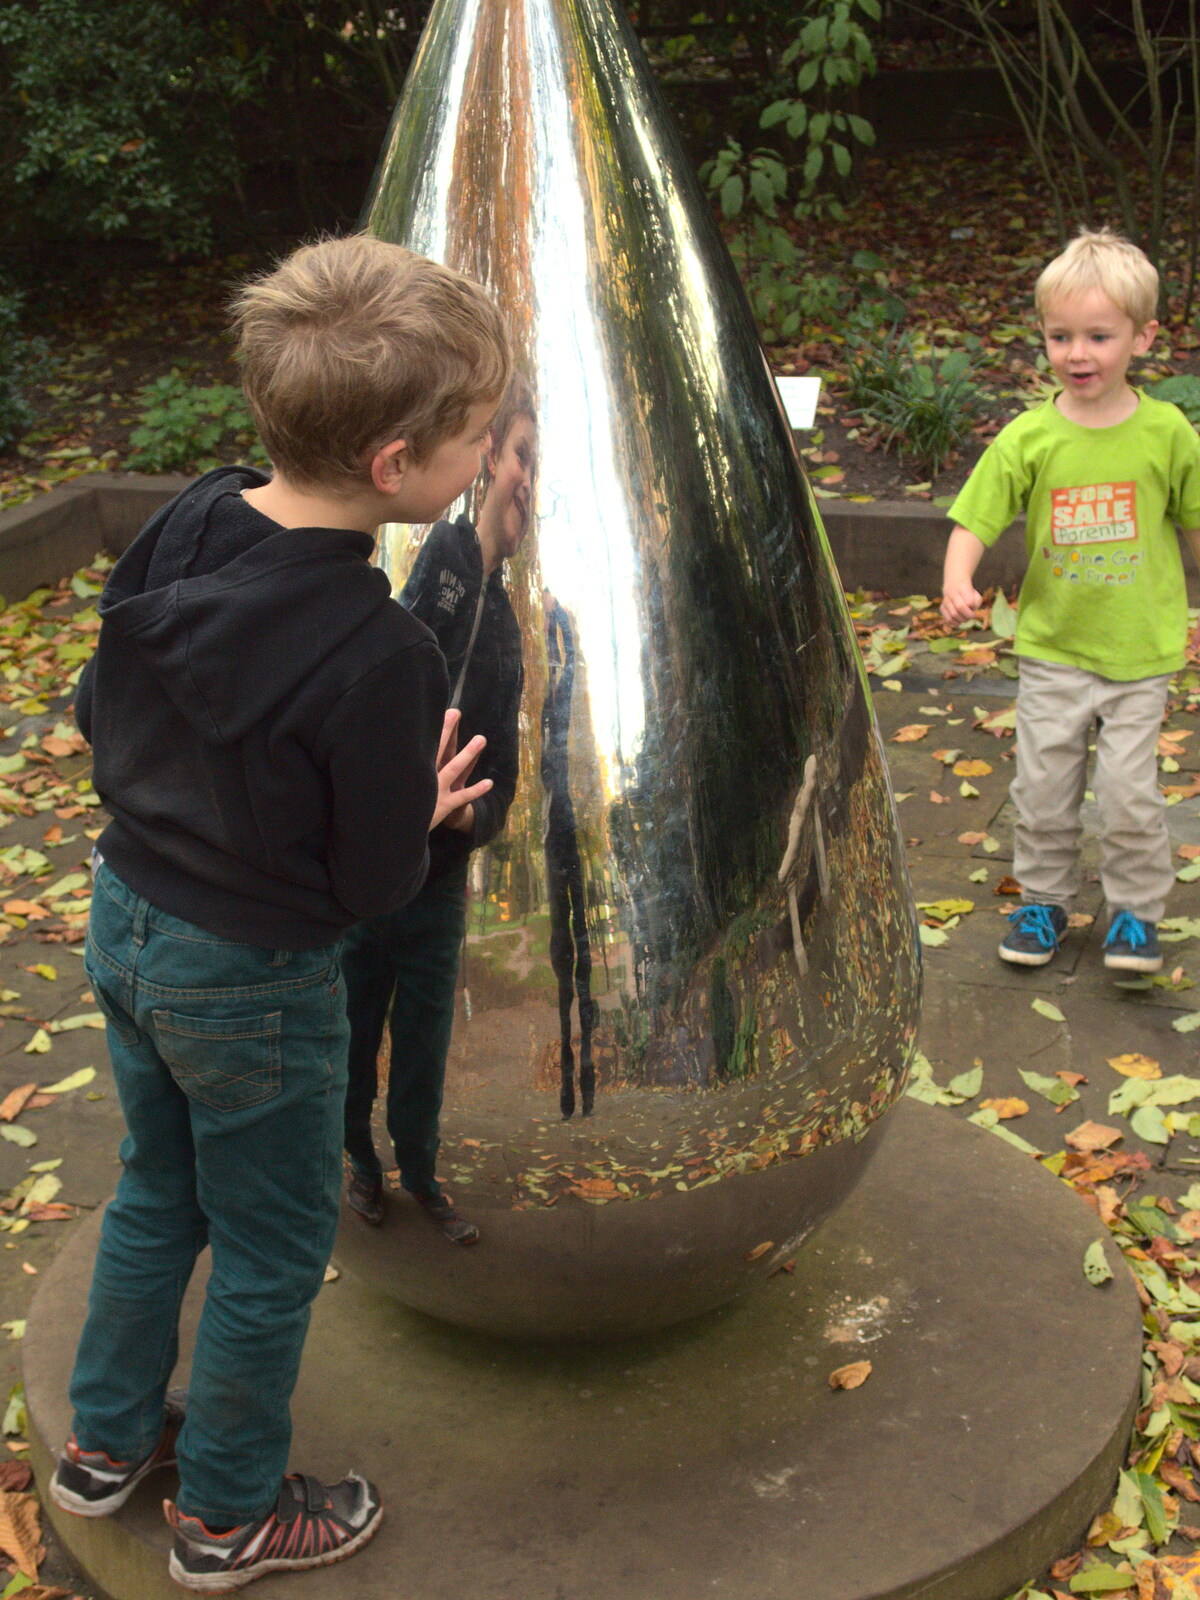 The boys mess around on a giant steel teardrop from Abbey Gardens in Autumn, Bury St. Edmunds, Suffolk - 27th October 2015